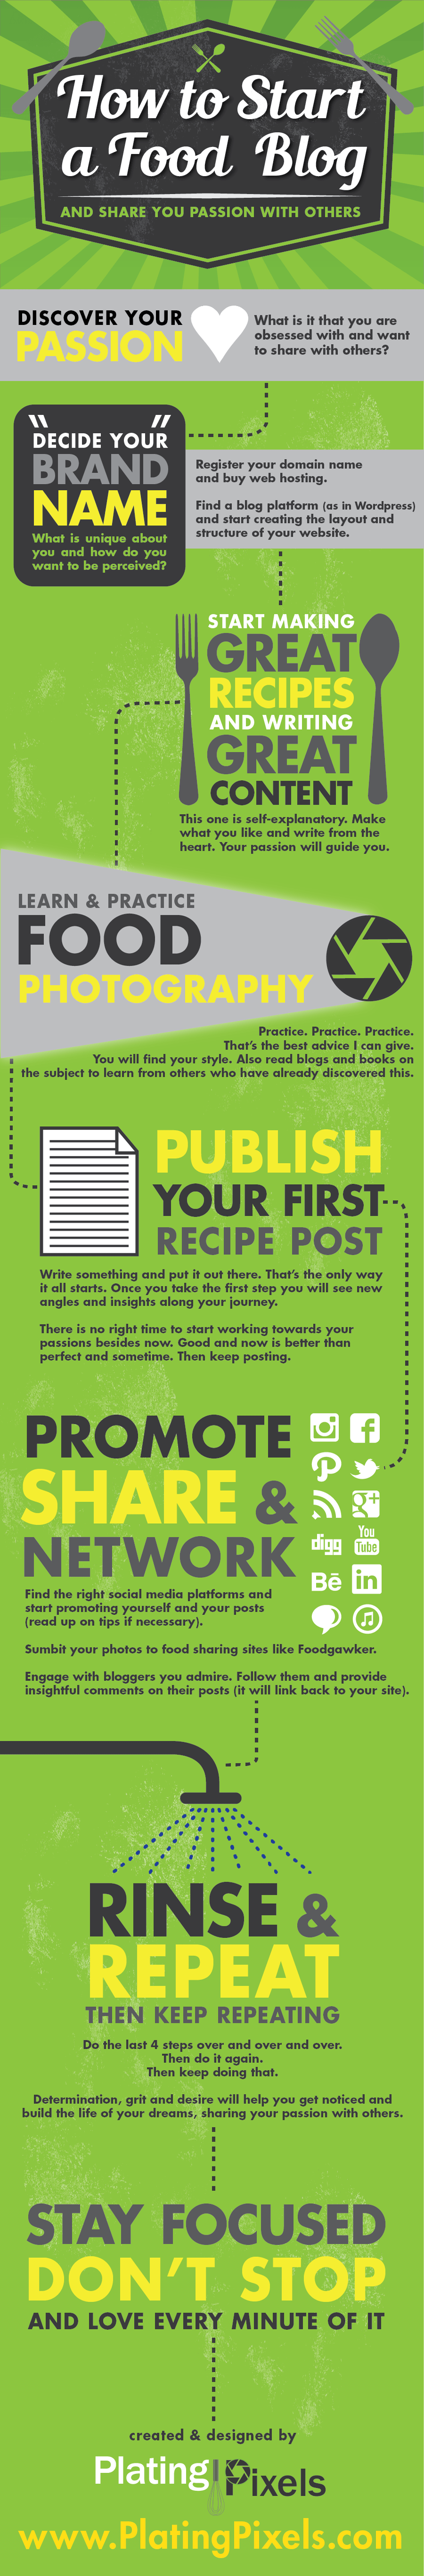 How to Start a Food Blog by Plating - #infographic